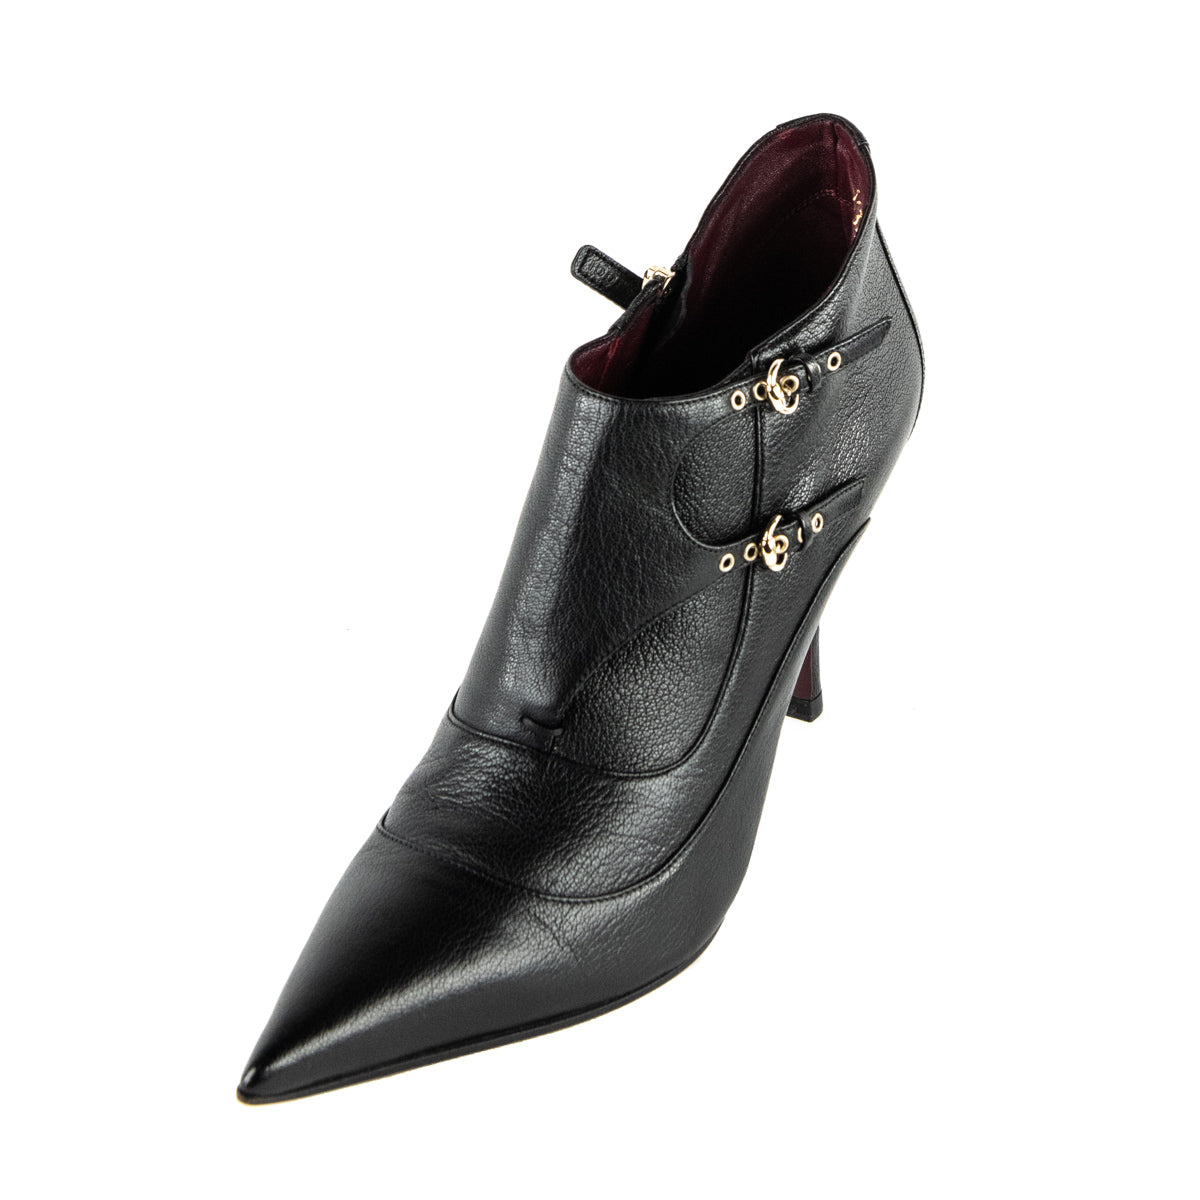 Gucci Black Pointed Toe Ankle Boots Size US 8.5 | EU 38.5 - Love that Bag etc - Preowned Authentic Designer Handbags & Preloved Fashions